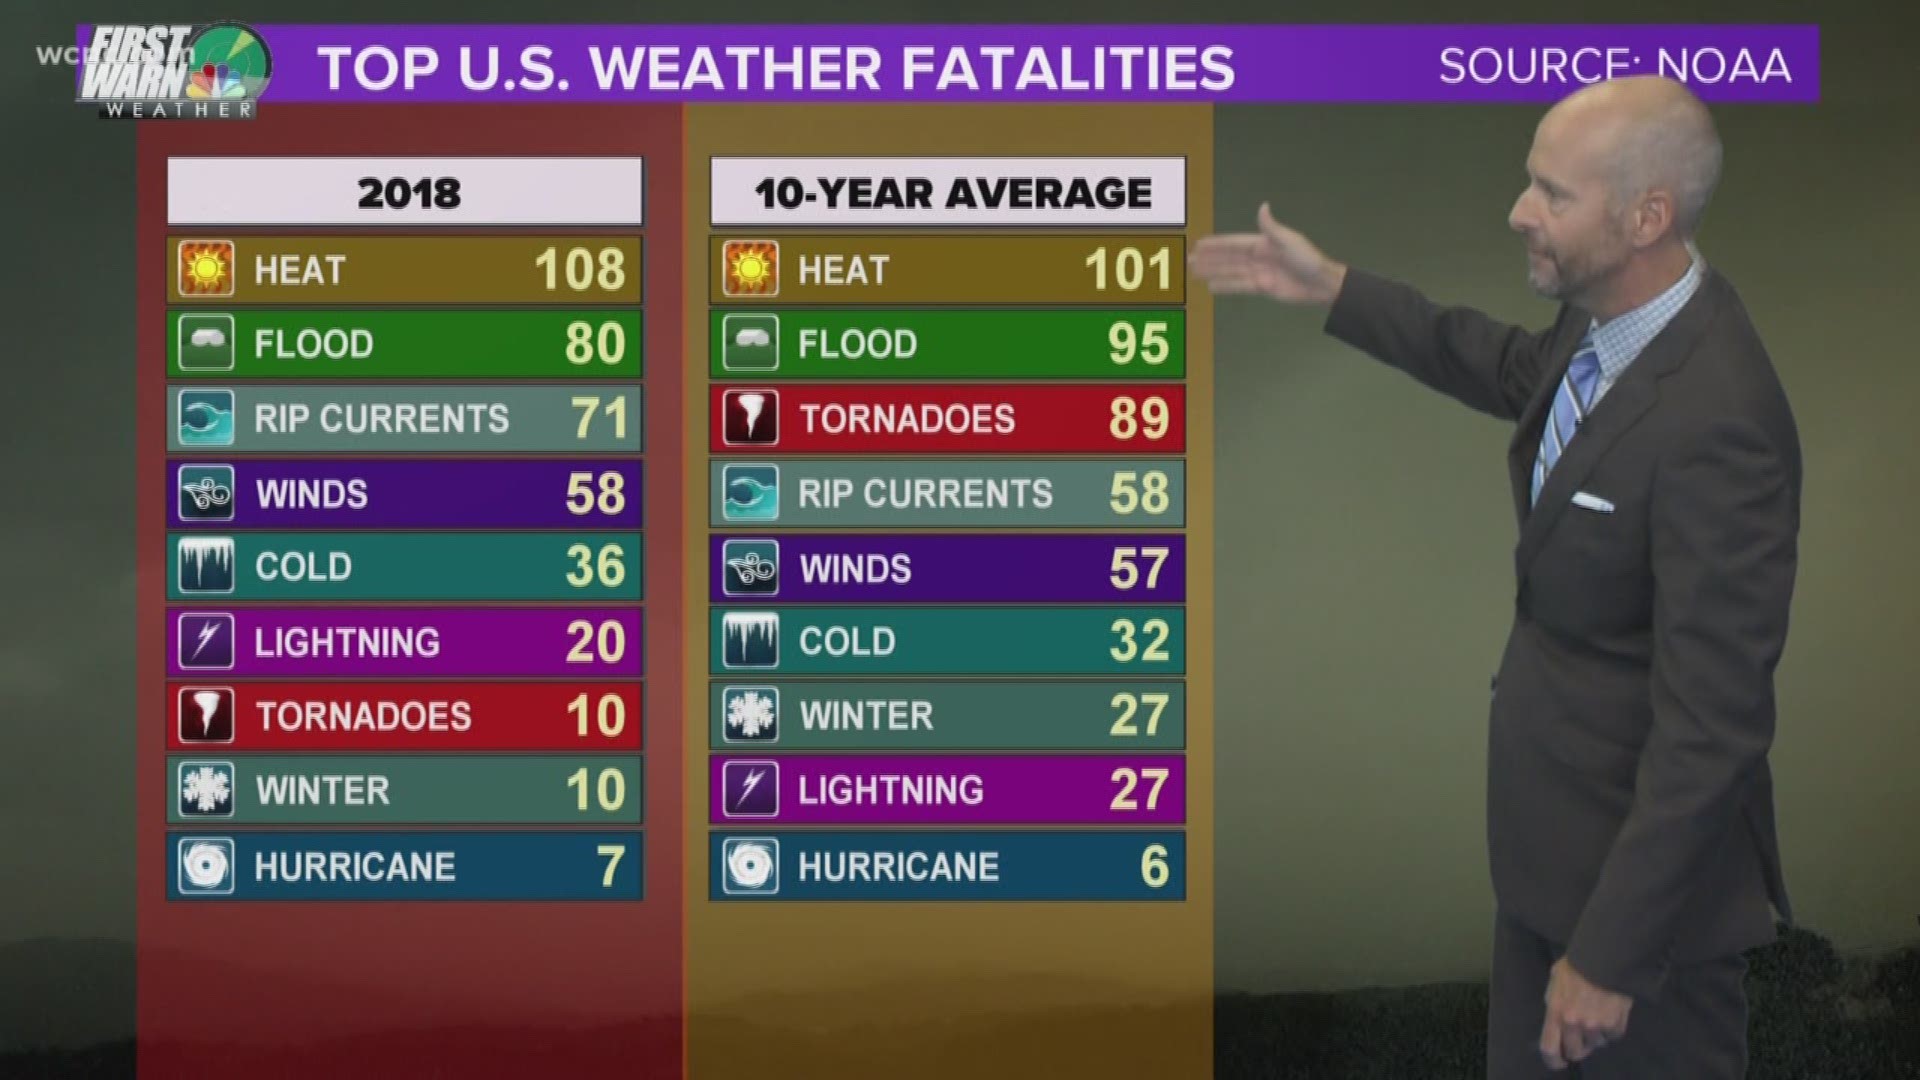 Chief Meteorologist Brad Panovich explained that heat causes more weather related deaths than any other form of weather.